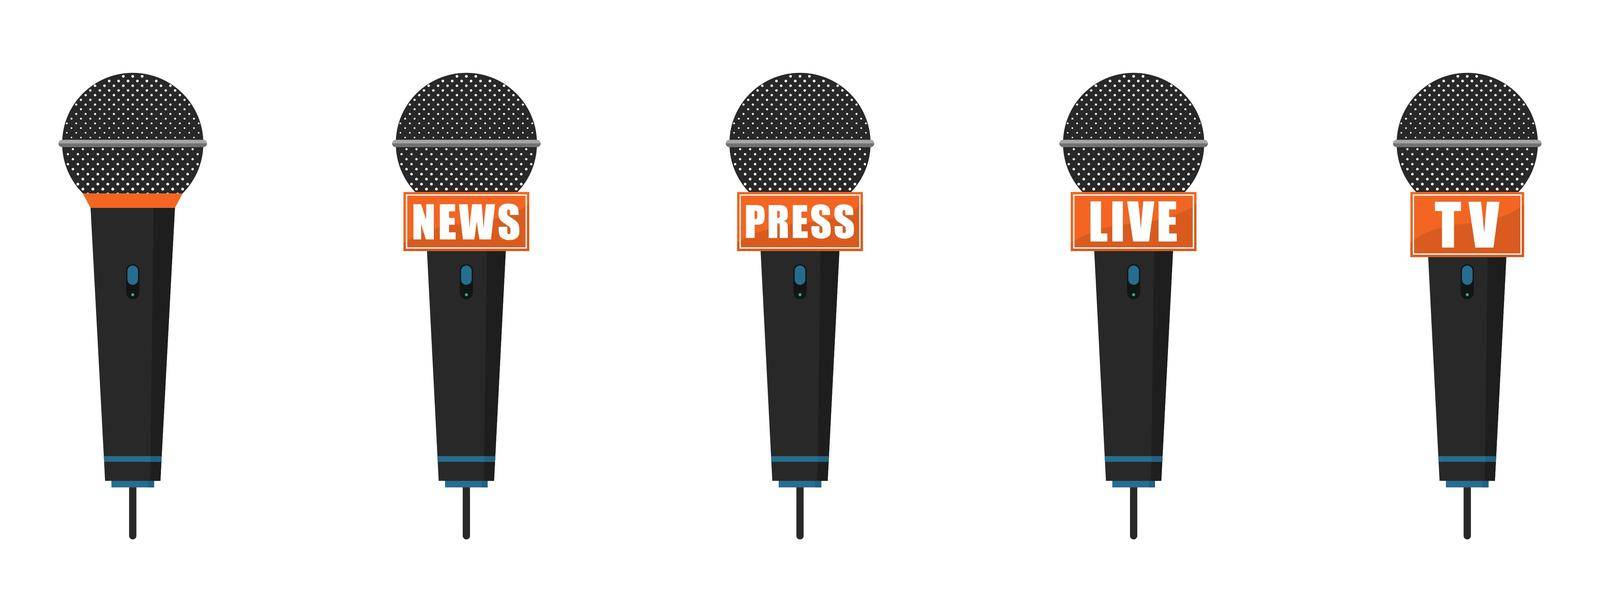 Microphone icons set. Press, news, live and TV microphones. Vector illustration. Live report concept